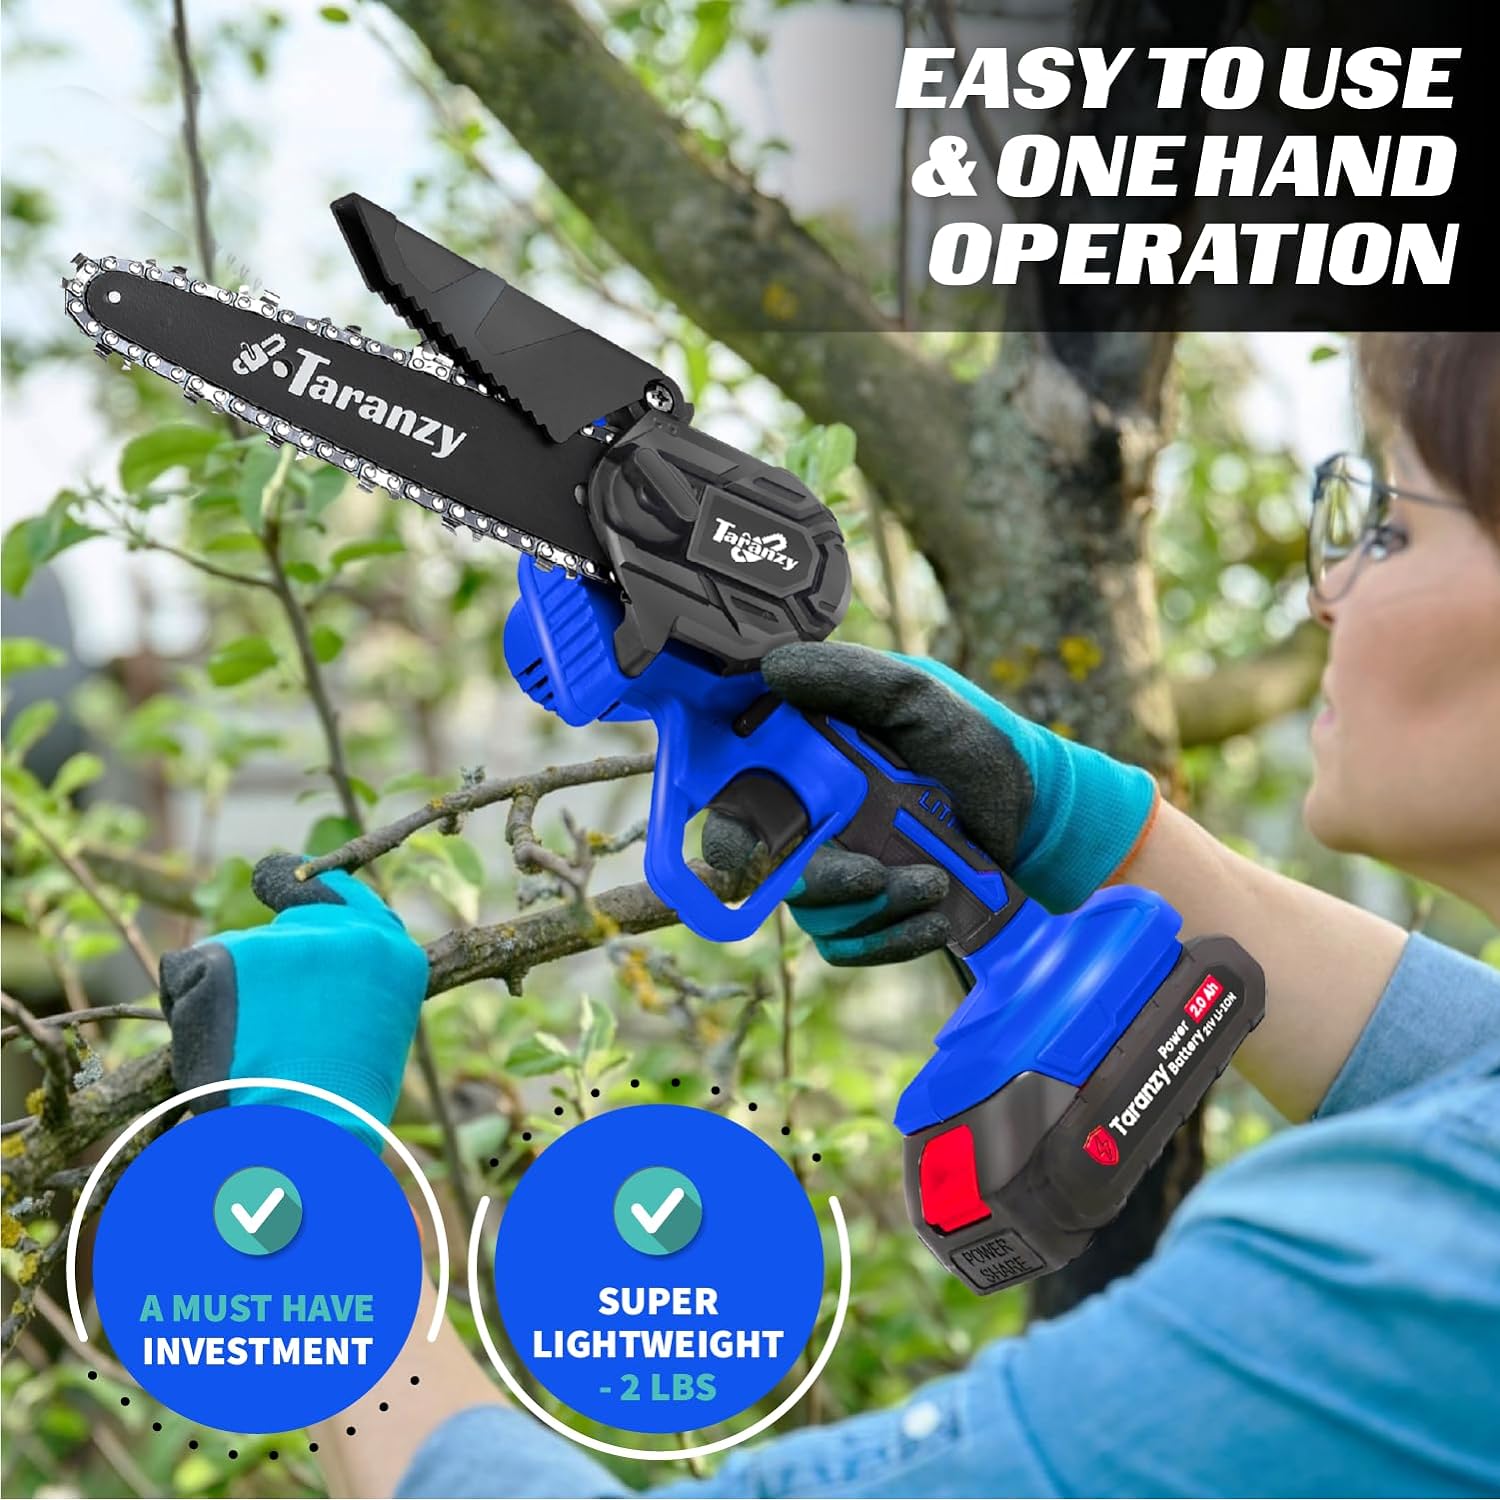 Mini Chainsaw 6-Inch with 2 Battery